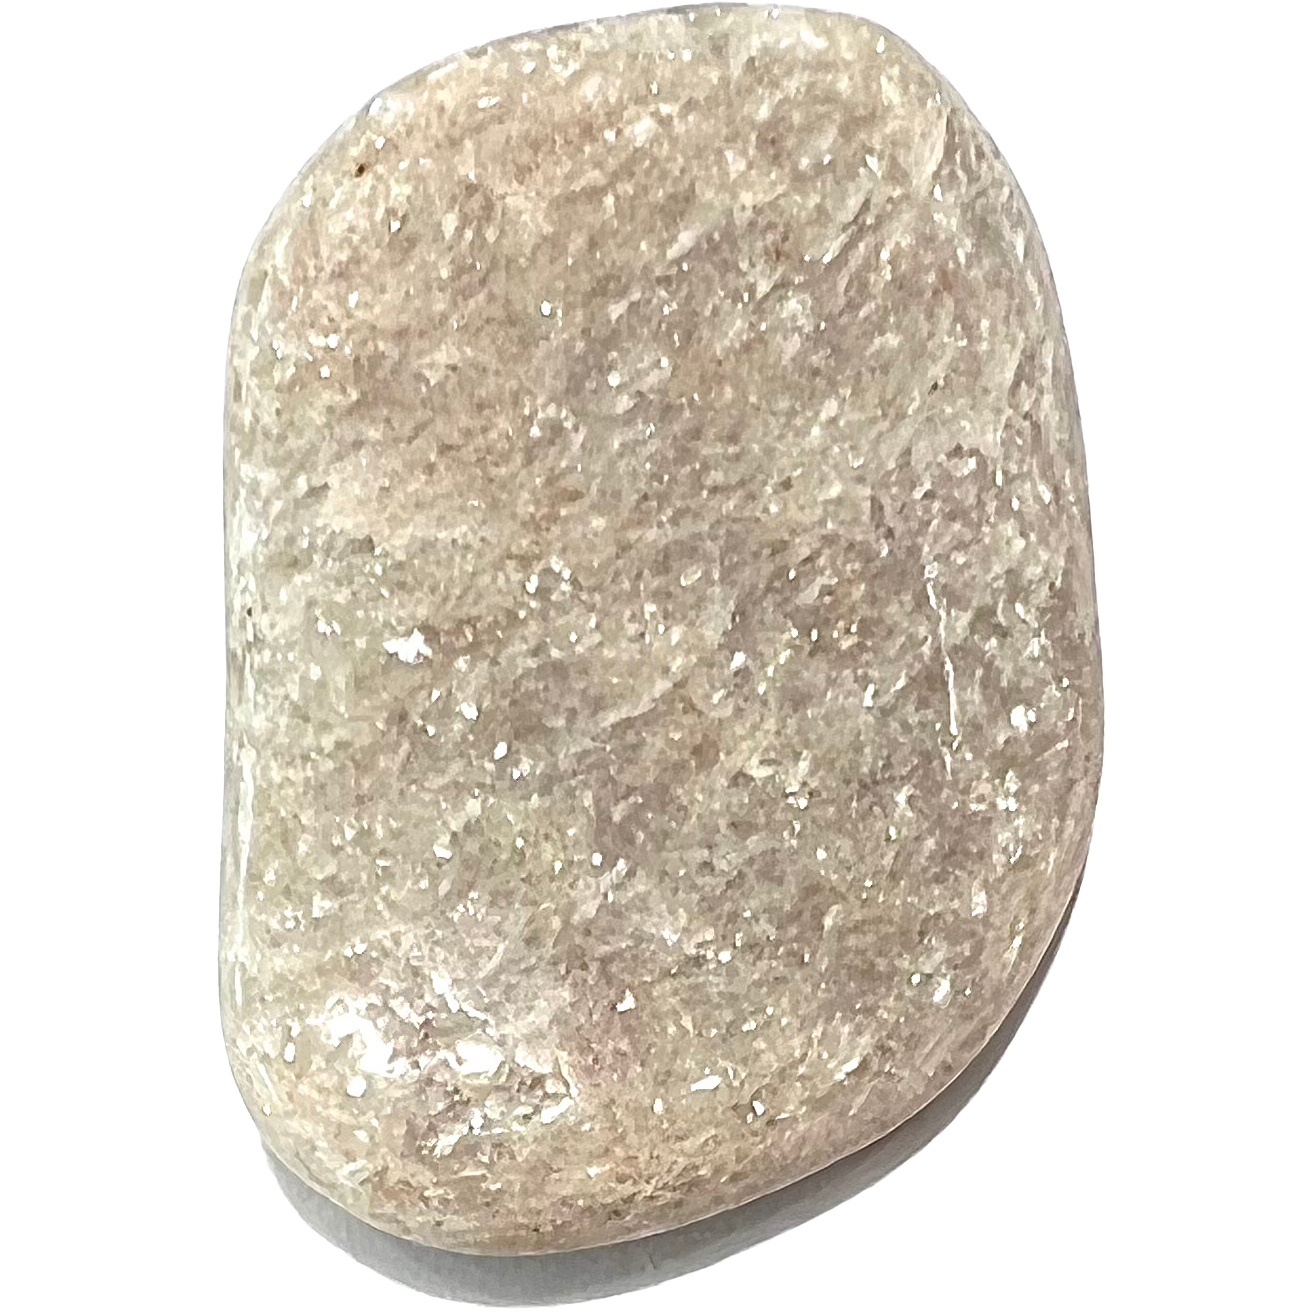 A tumble polished white aventurine stone.  The stone is white with mica sparkle inclusions.